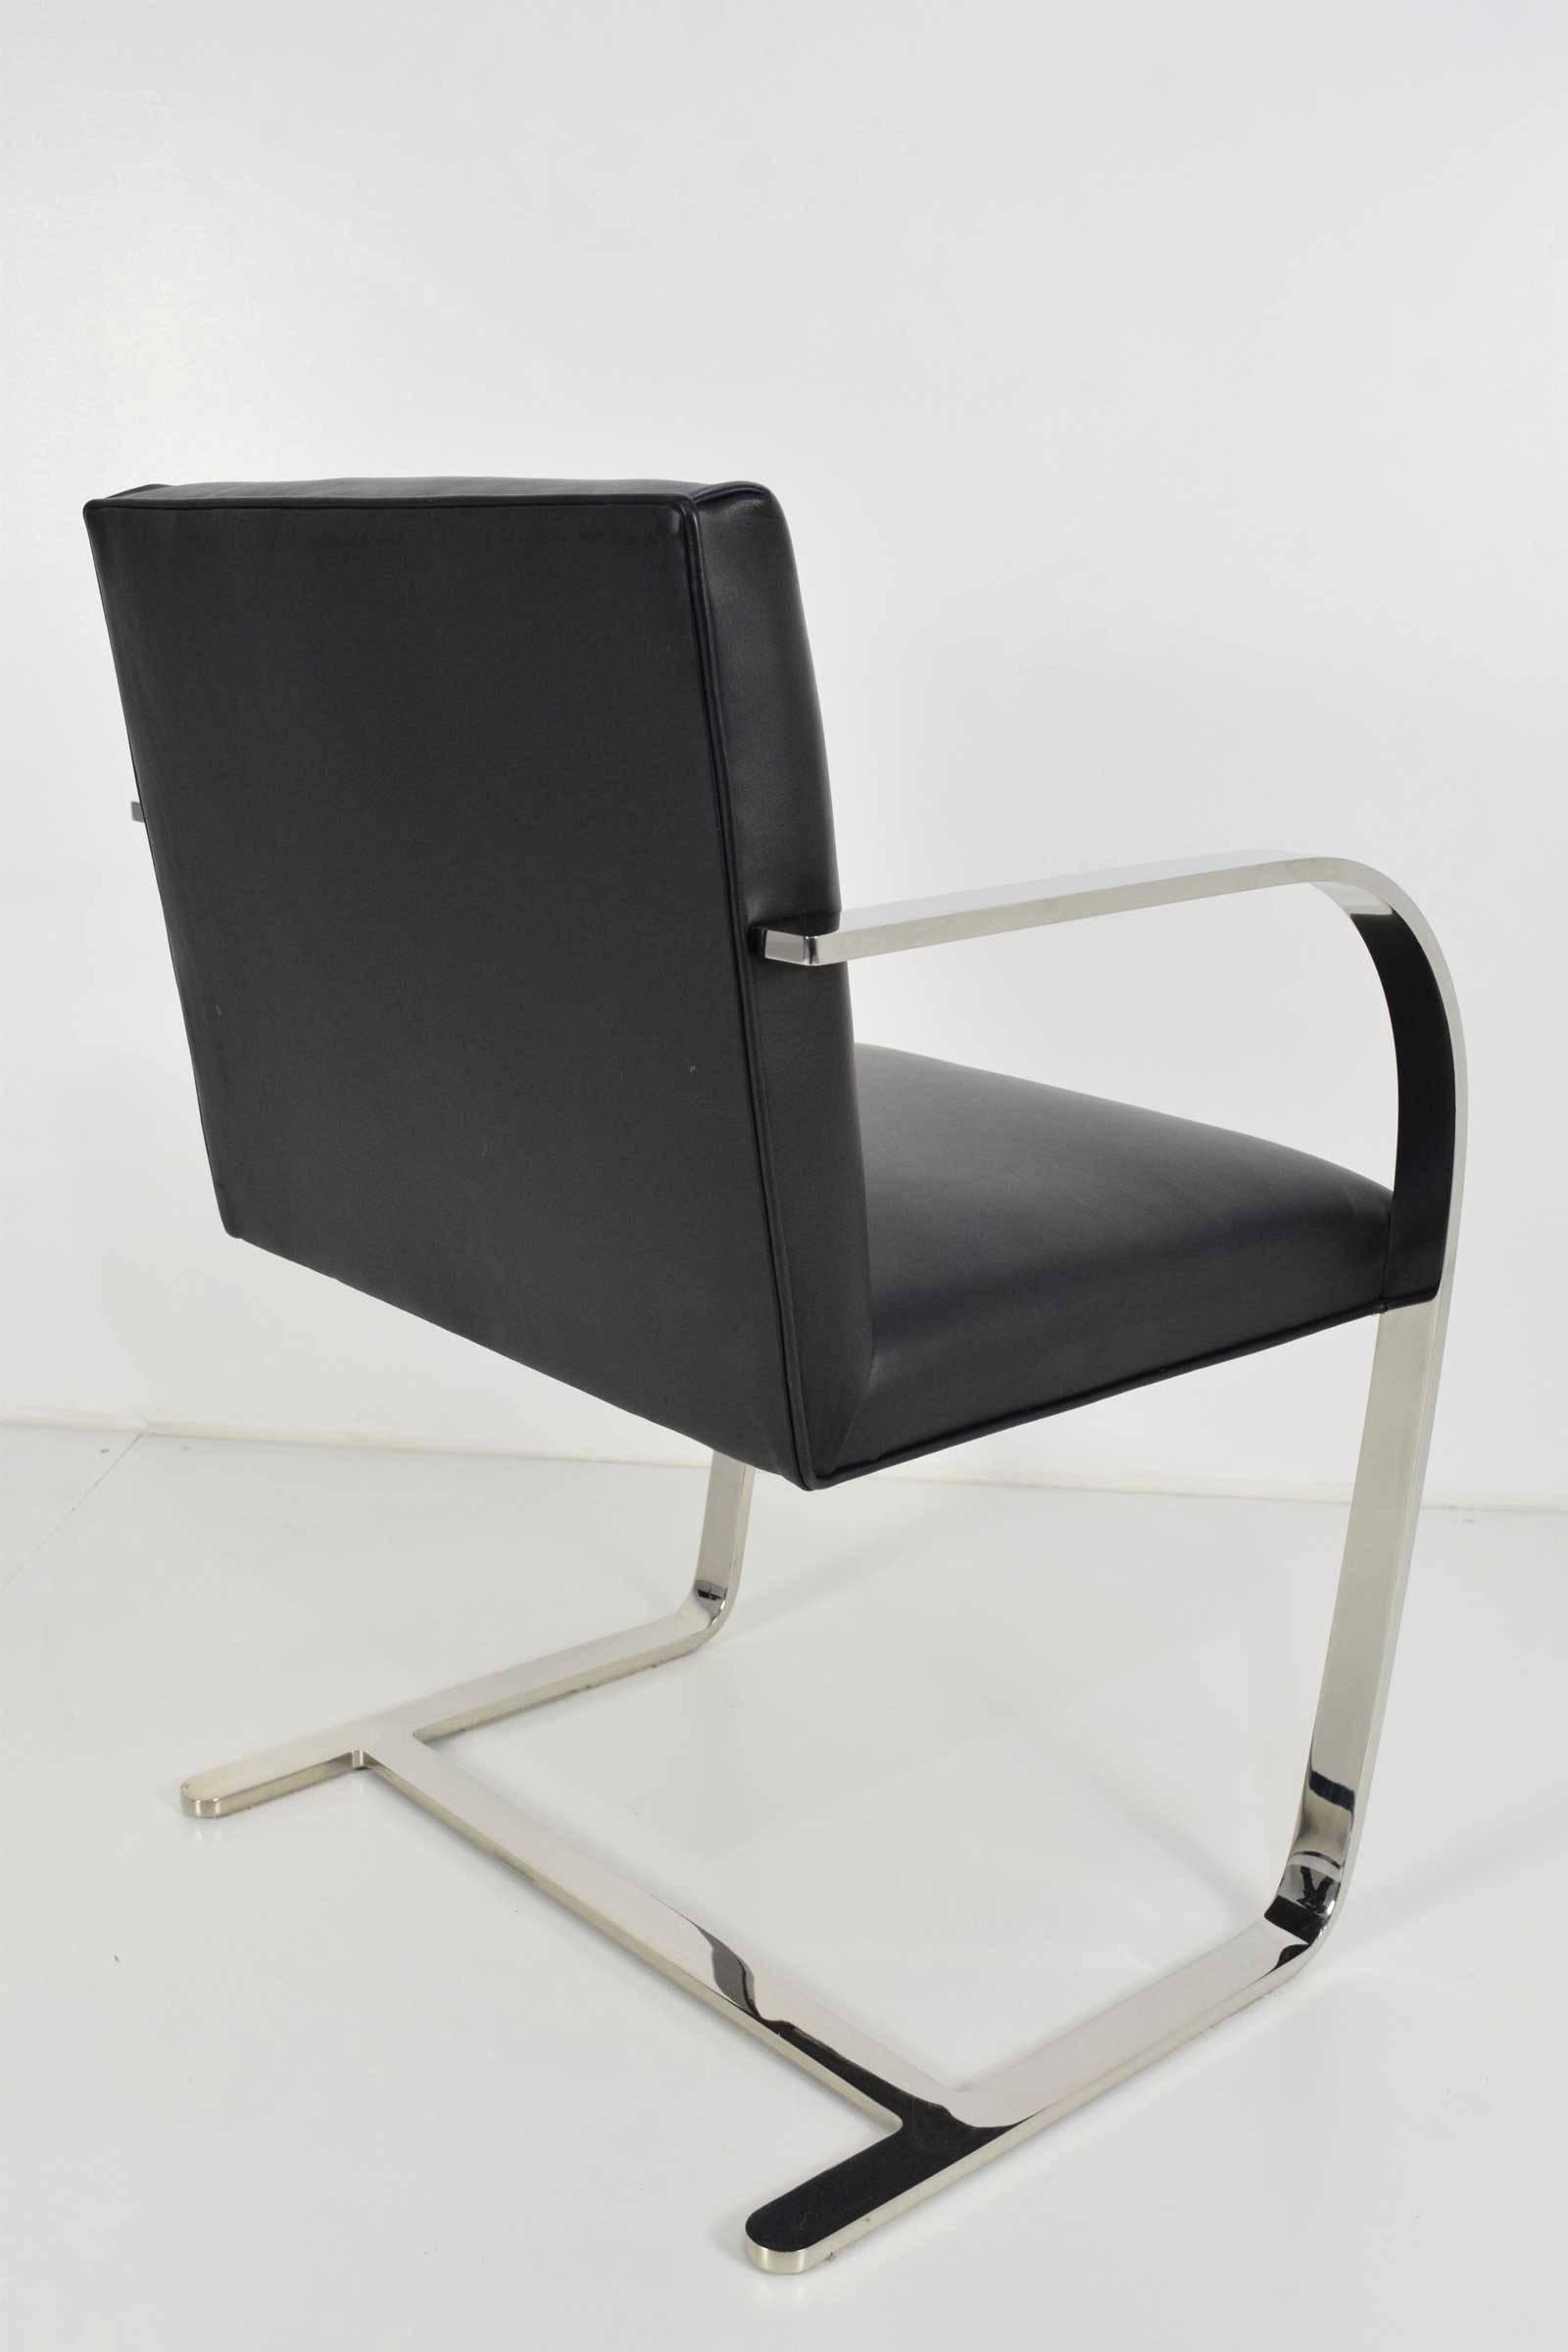 20th Century Flat Bar Brno Chairs by Mies van der Rohe for Knoll